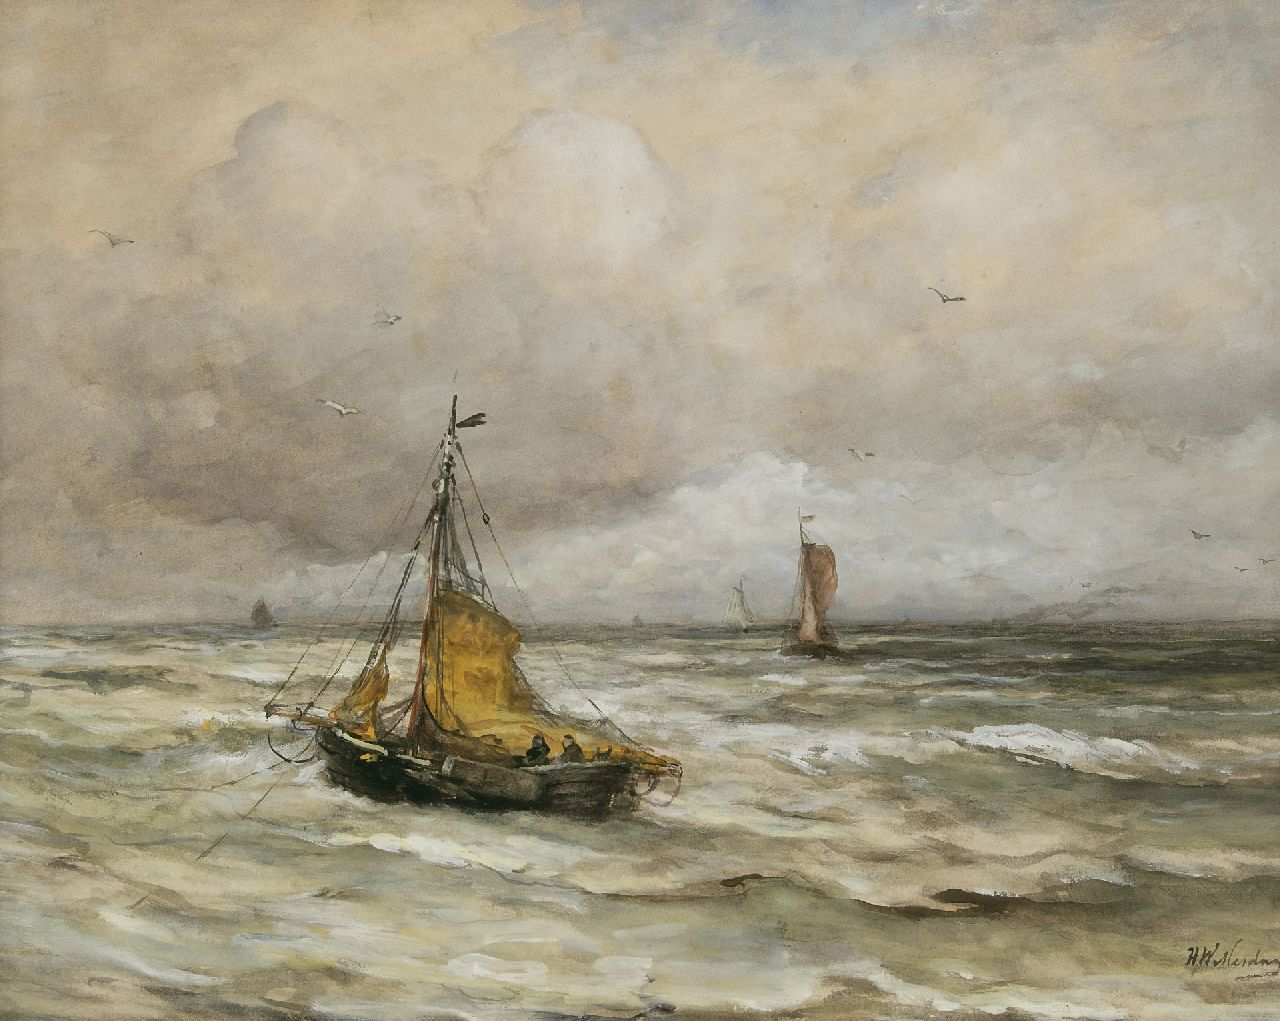 Mesdag H.W.  | Hendrik Willem Mesdag | Watercolours and drawings offered for sale | At anchor in the surf, watercolour and gouache on paper 44.5 x 55.4 cm, signed l.r.